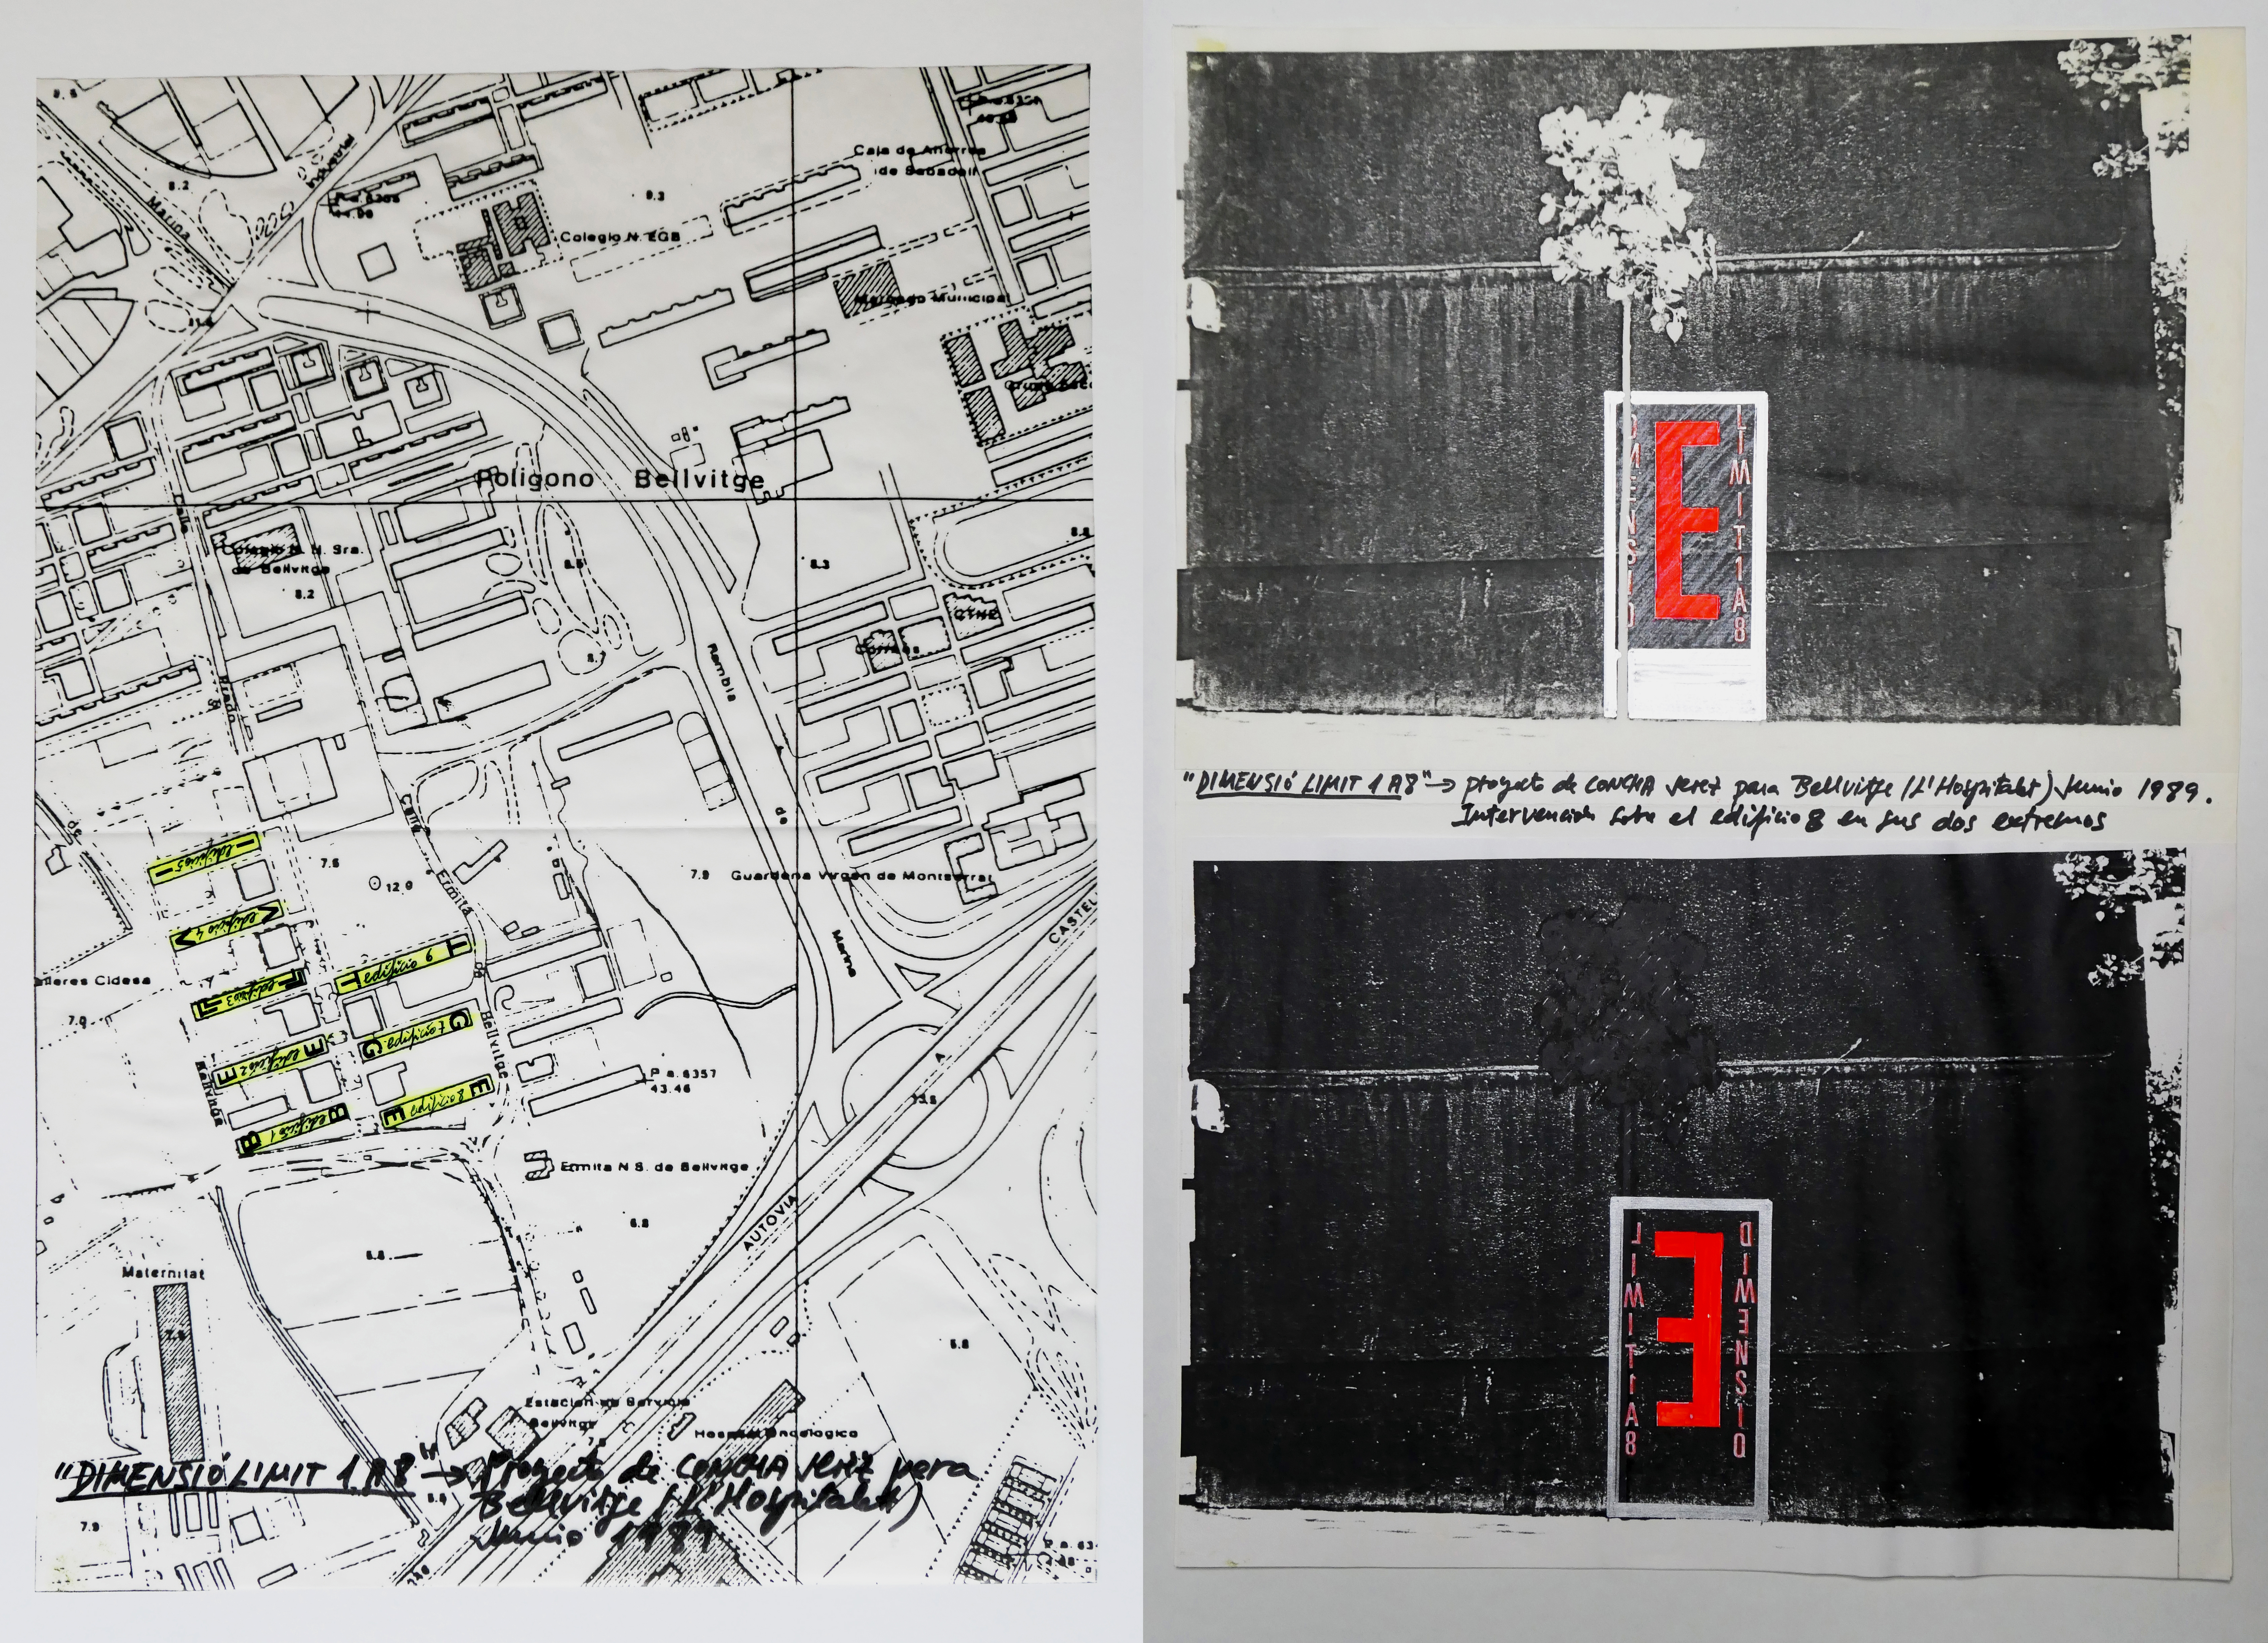 "DIMENSIÓ LIMIT 1 A 8", 1989
Site-specific installation project for “L’Hospitalet Art”. 1 intervened map (42 x 29,5 cm.) and 8 collages (31 x 44 cm.)